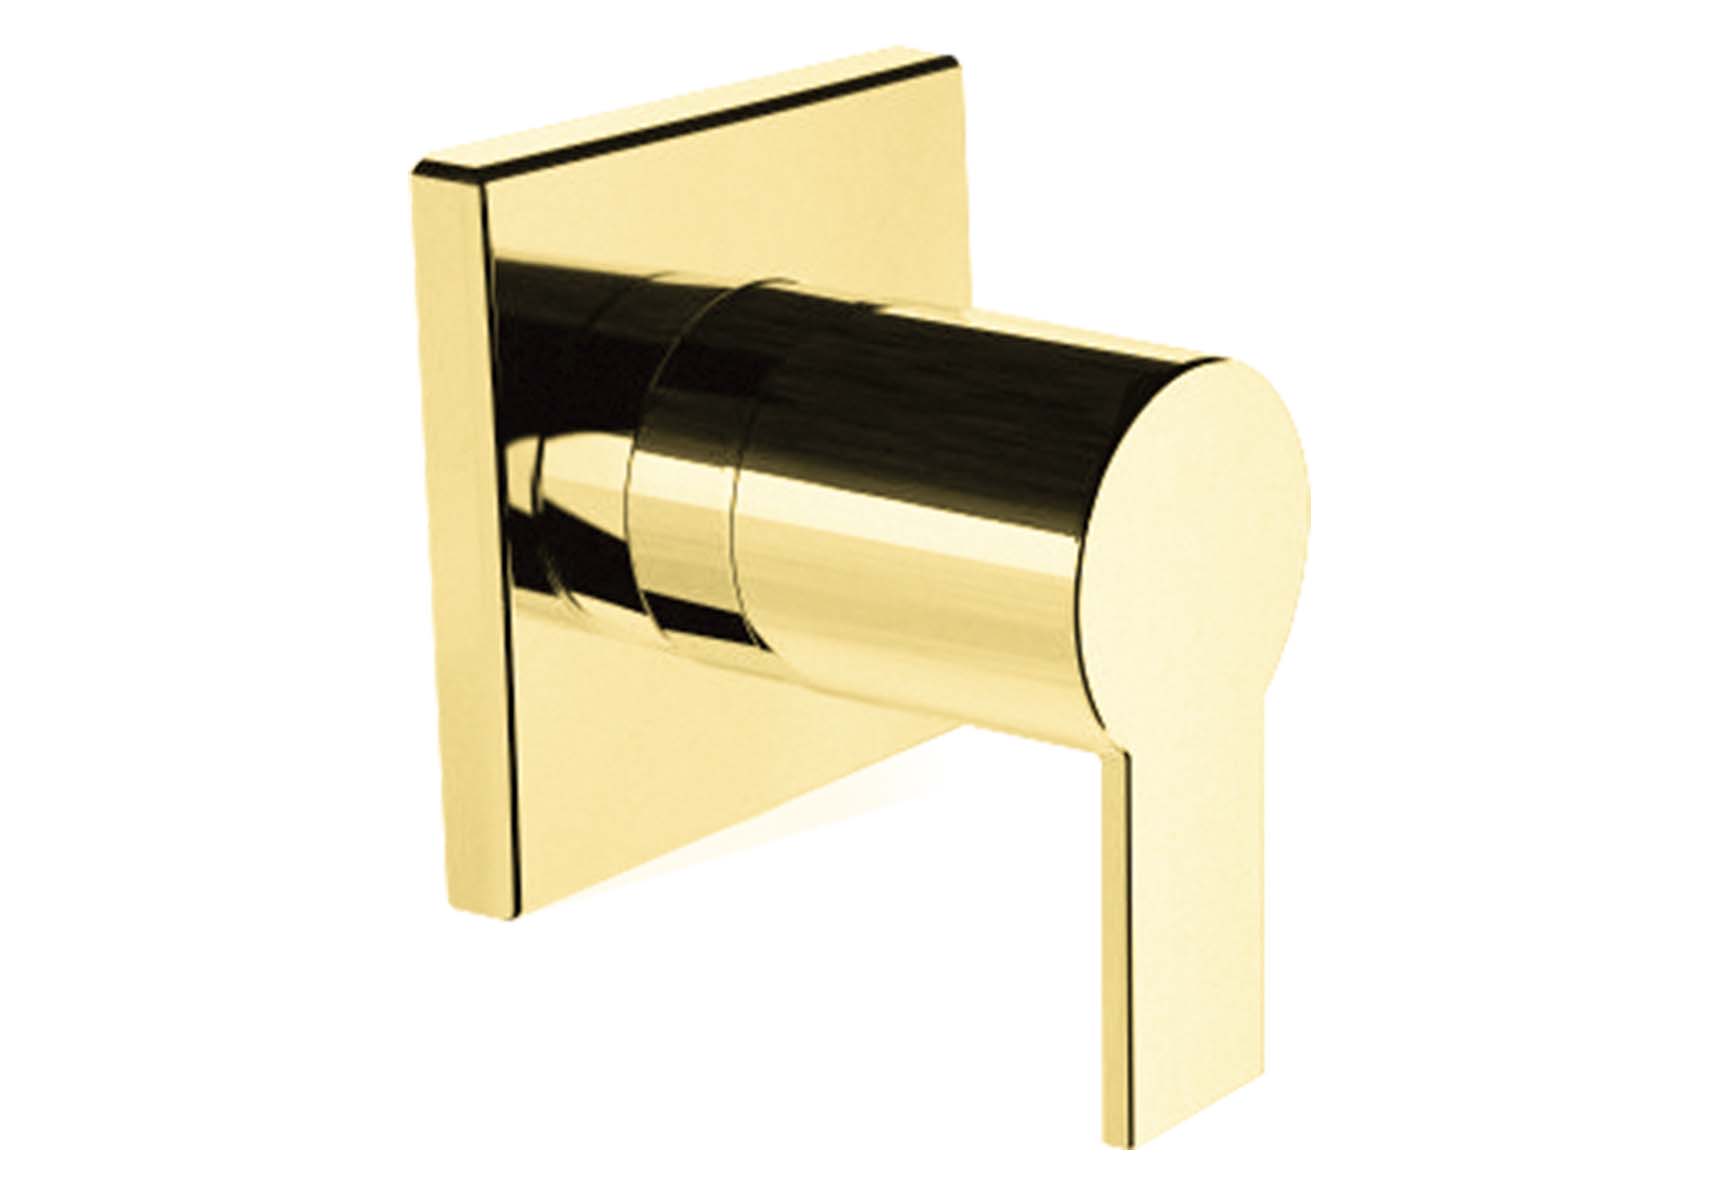 Flo S Built-In Stop Valve , Exposed Part, Gold